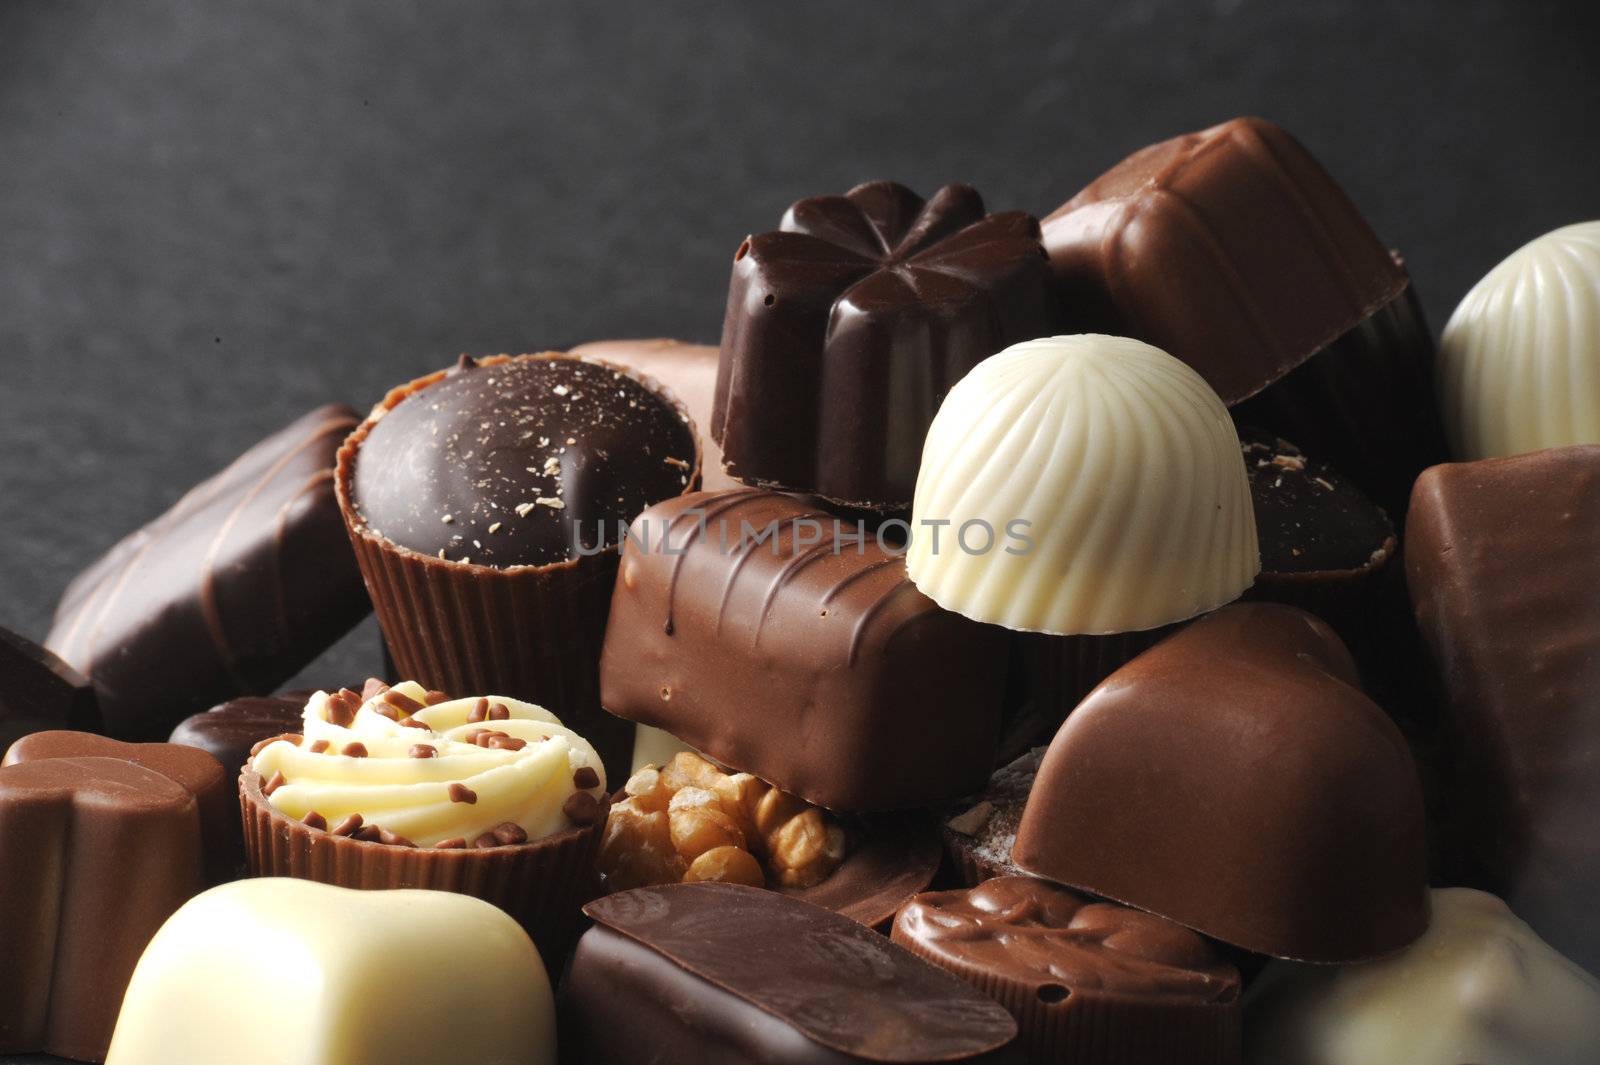 Selection of delicious hand made luxury chocolates